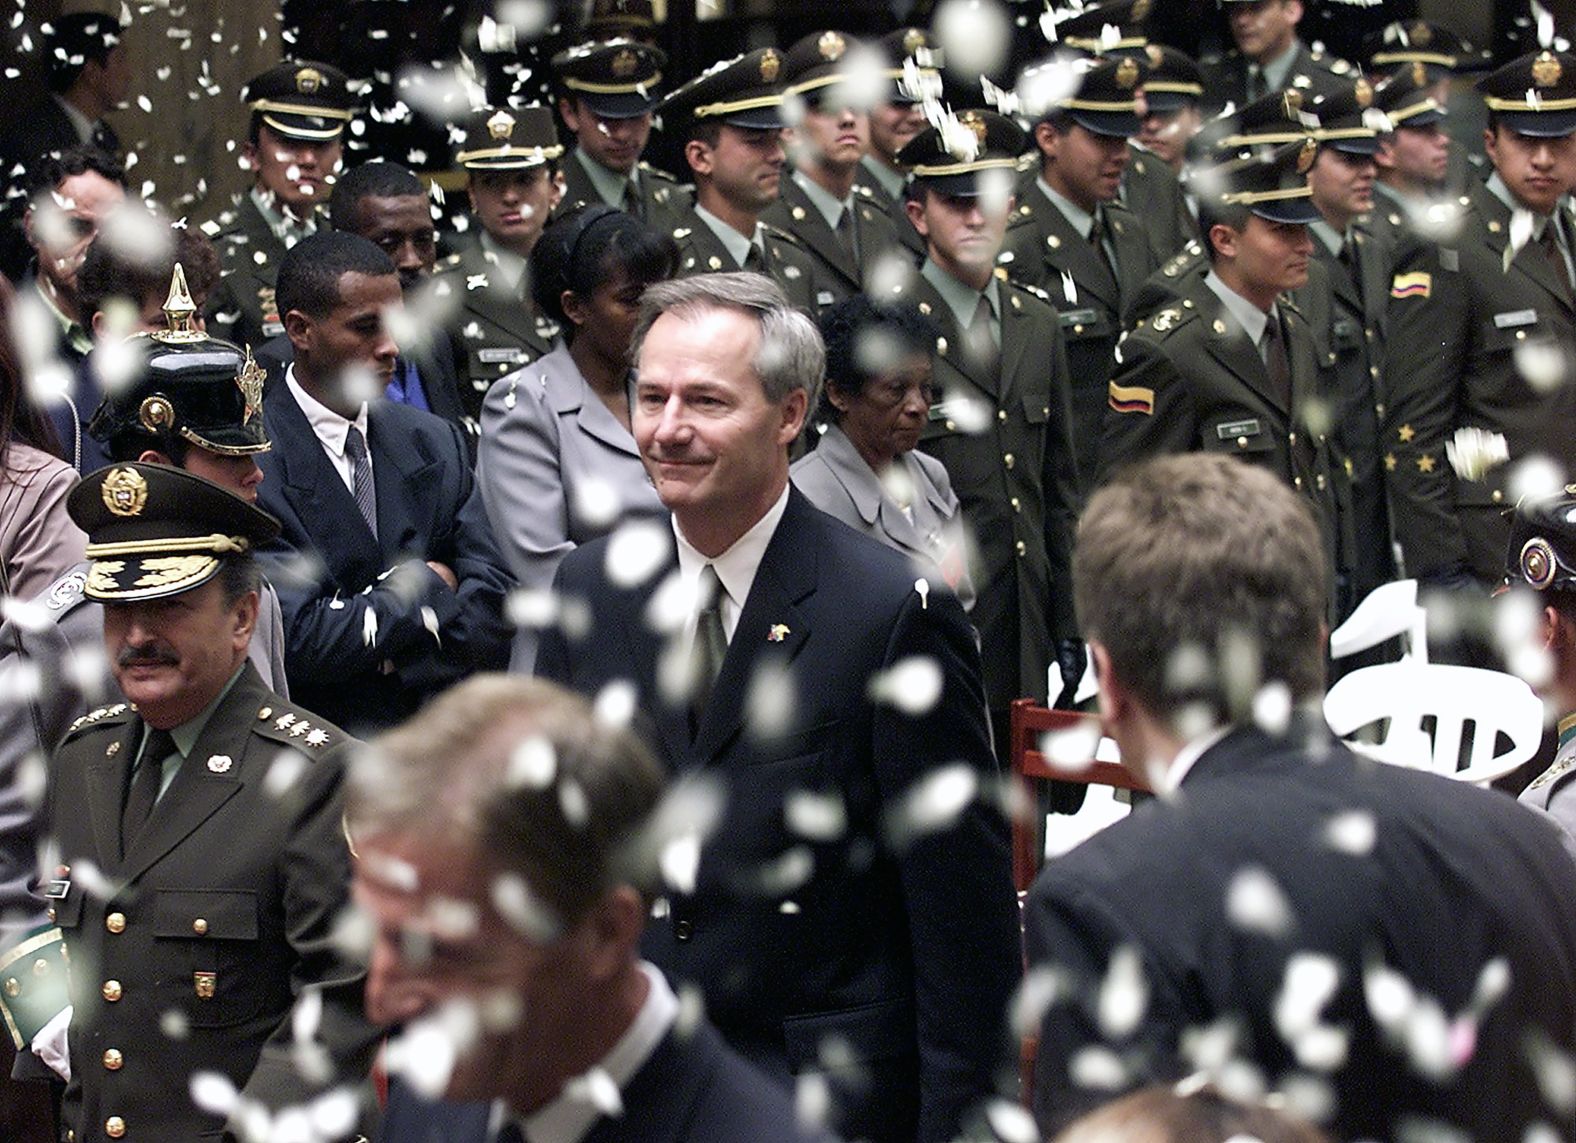 Flower petals rain down on Hutchinson as he arrives at the national police headquarters in Bogotá in March 2002.